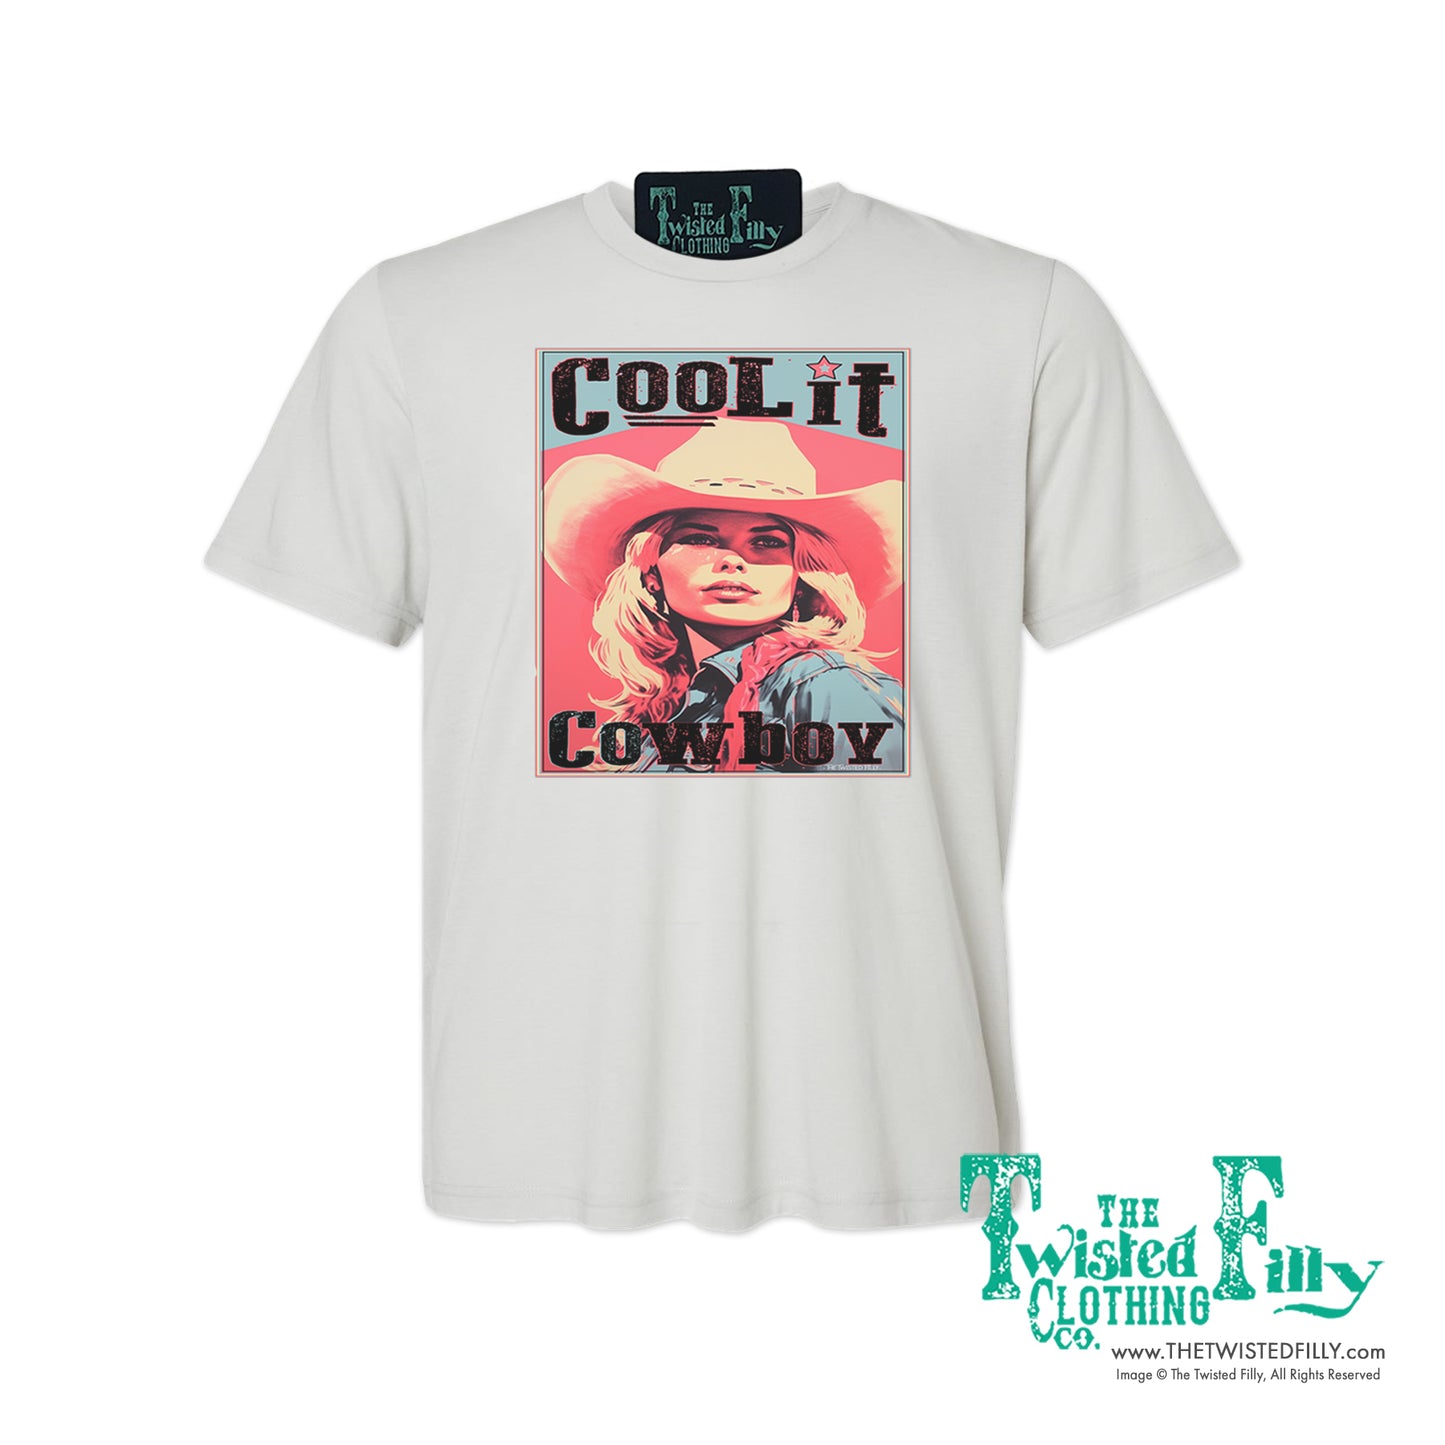 Cool It Cowboy - S/S Adult Crew Neck Womens Tee - Assorted Colors